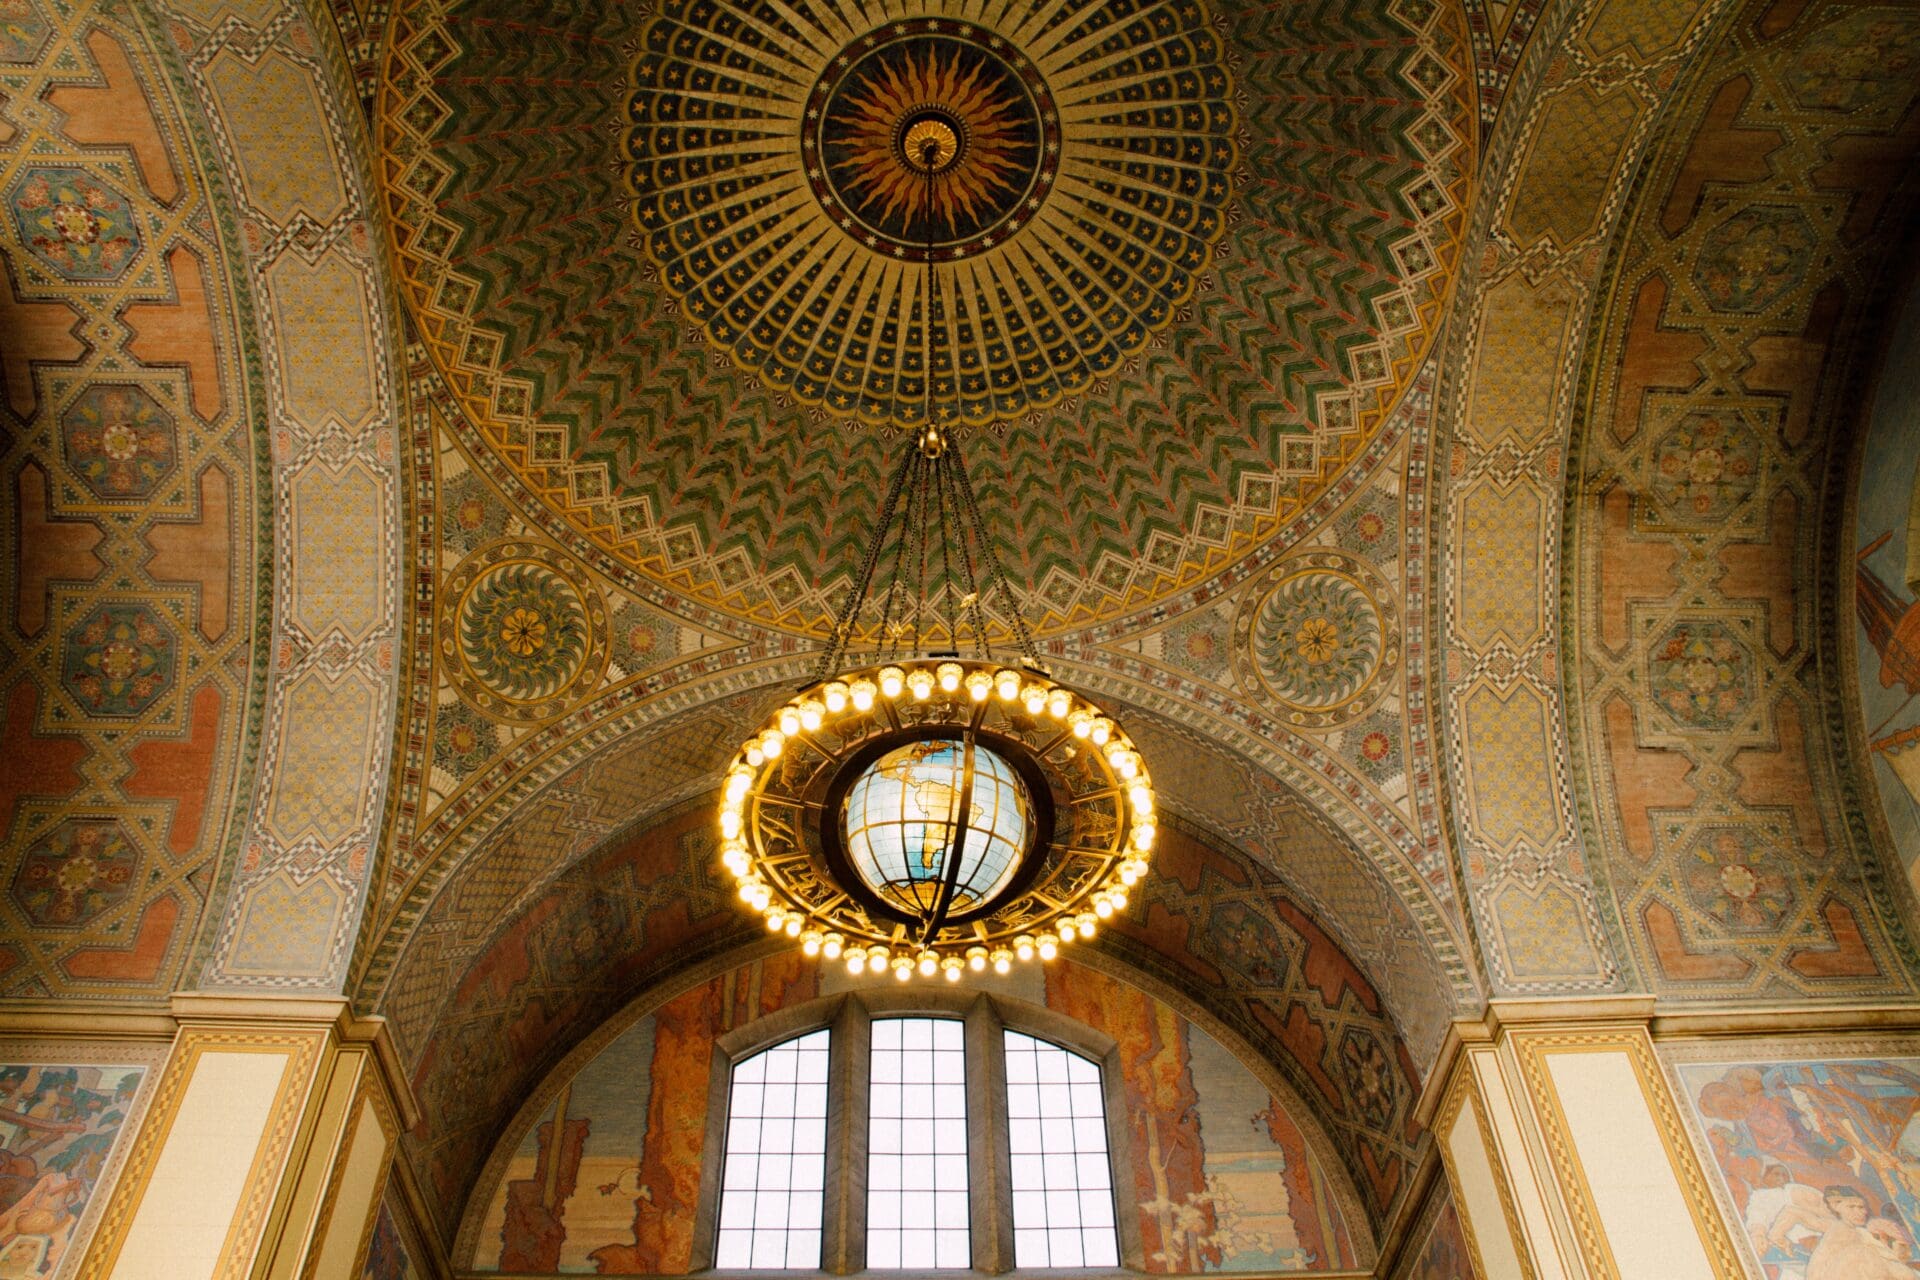 Travelling from LA to San Francisco via Amtrak train | Looking up at the ceiling of LA Union Station, will beautiful mosaics and an art deco light installation of a globe framed by globe lights